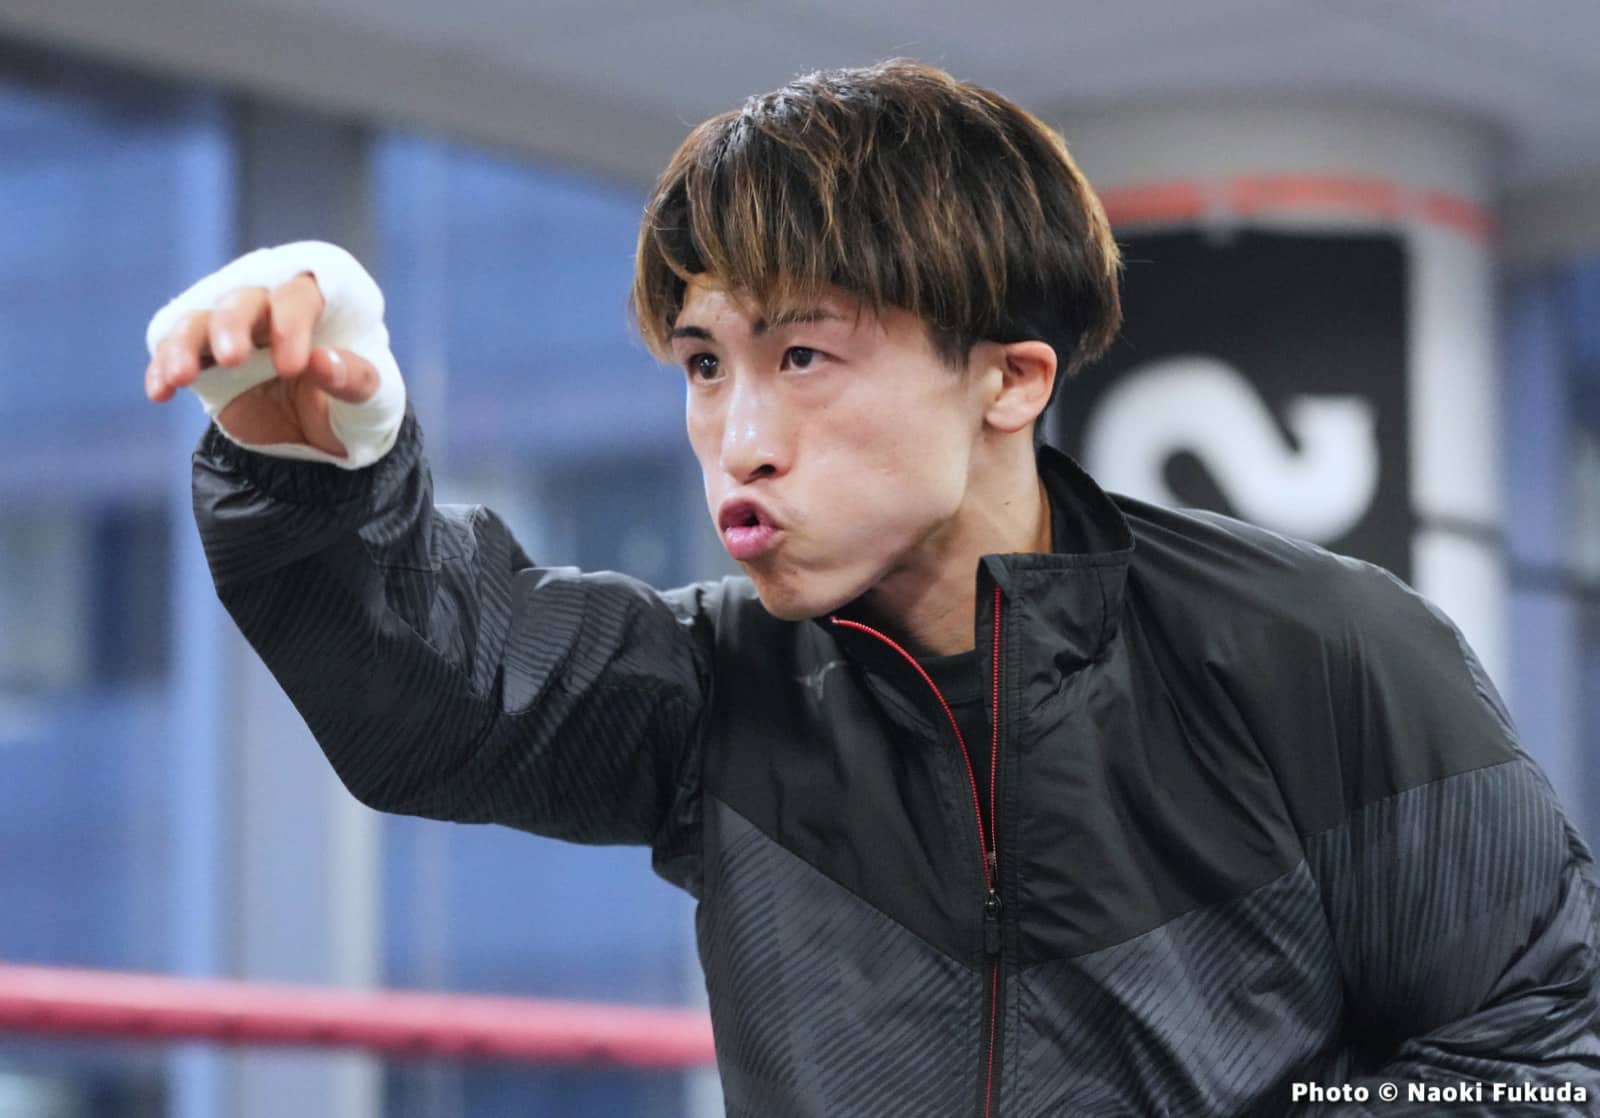 Inoue vs Butler On December 13 In Japan: Another Scary KO For "The Monster?"